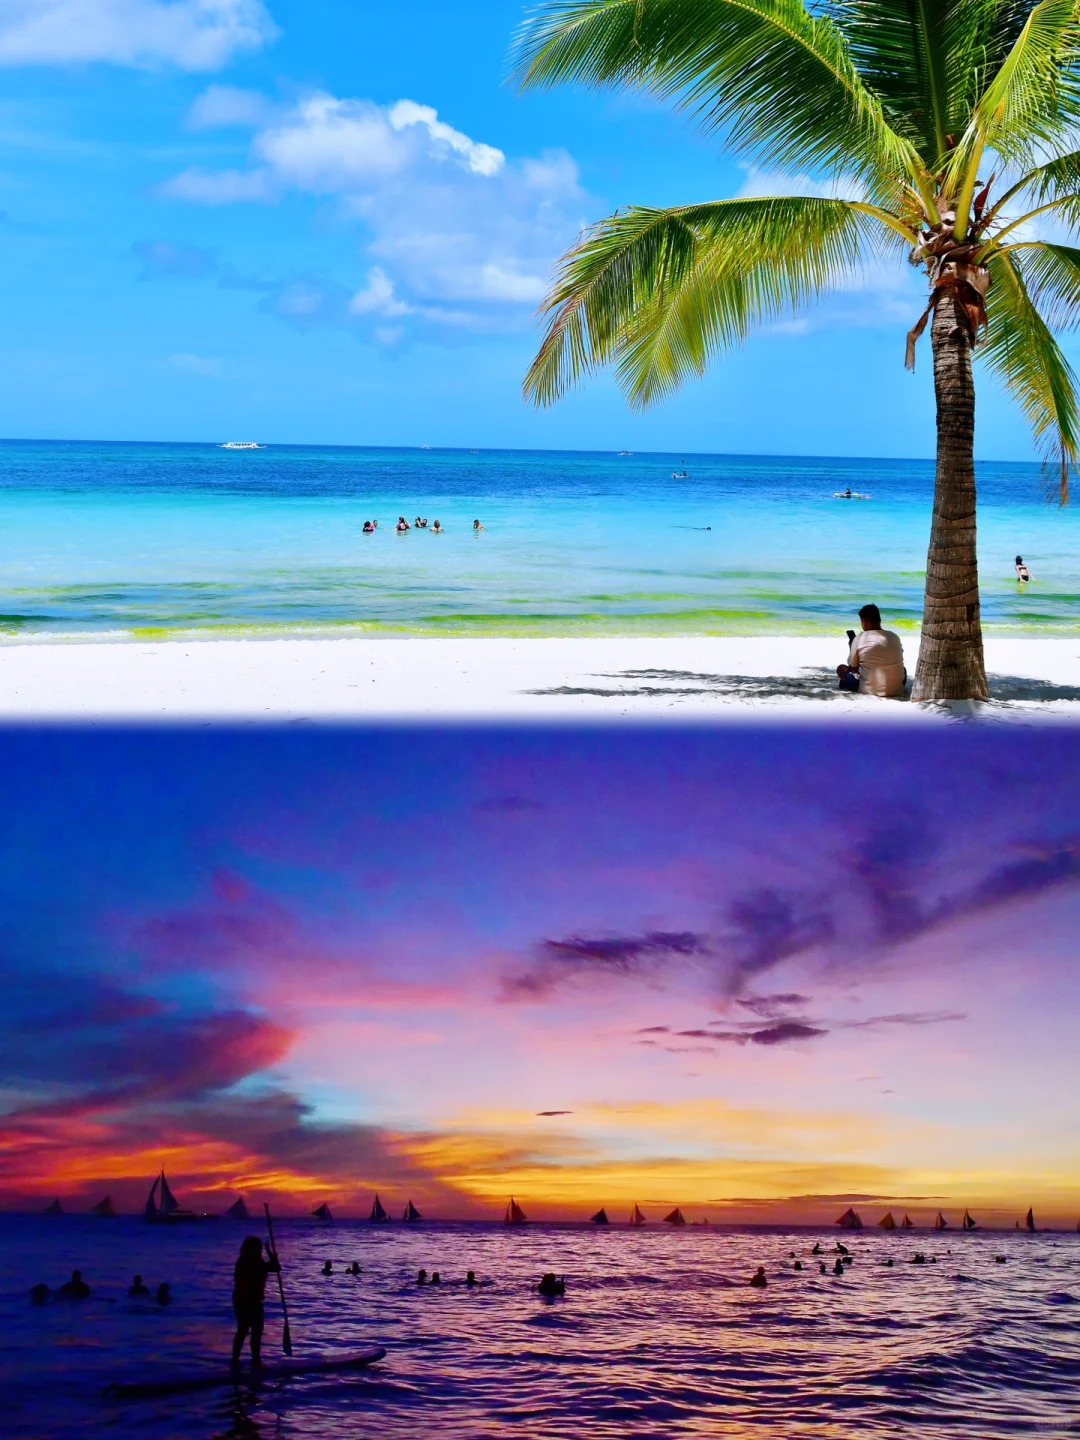 Boracay-Fly directly to Boracay to see the most beautiful sunset in the world, 7 days and 6 nights guide